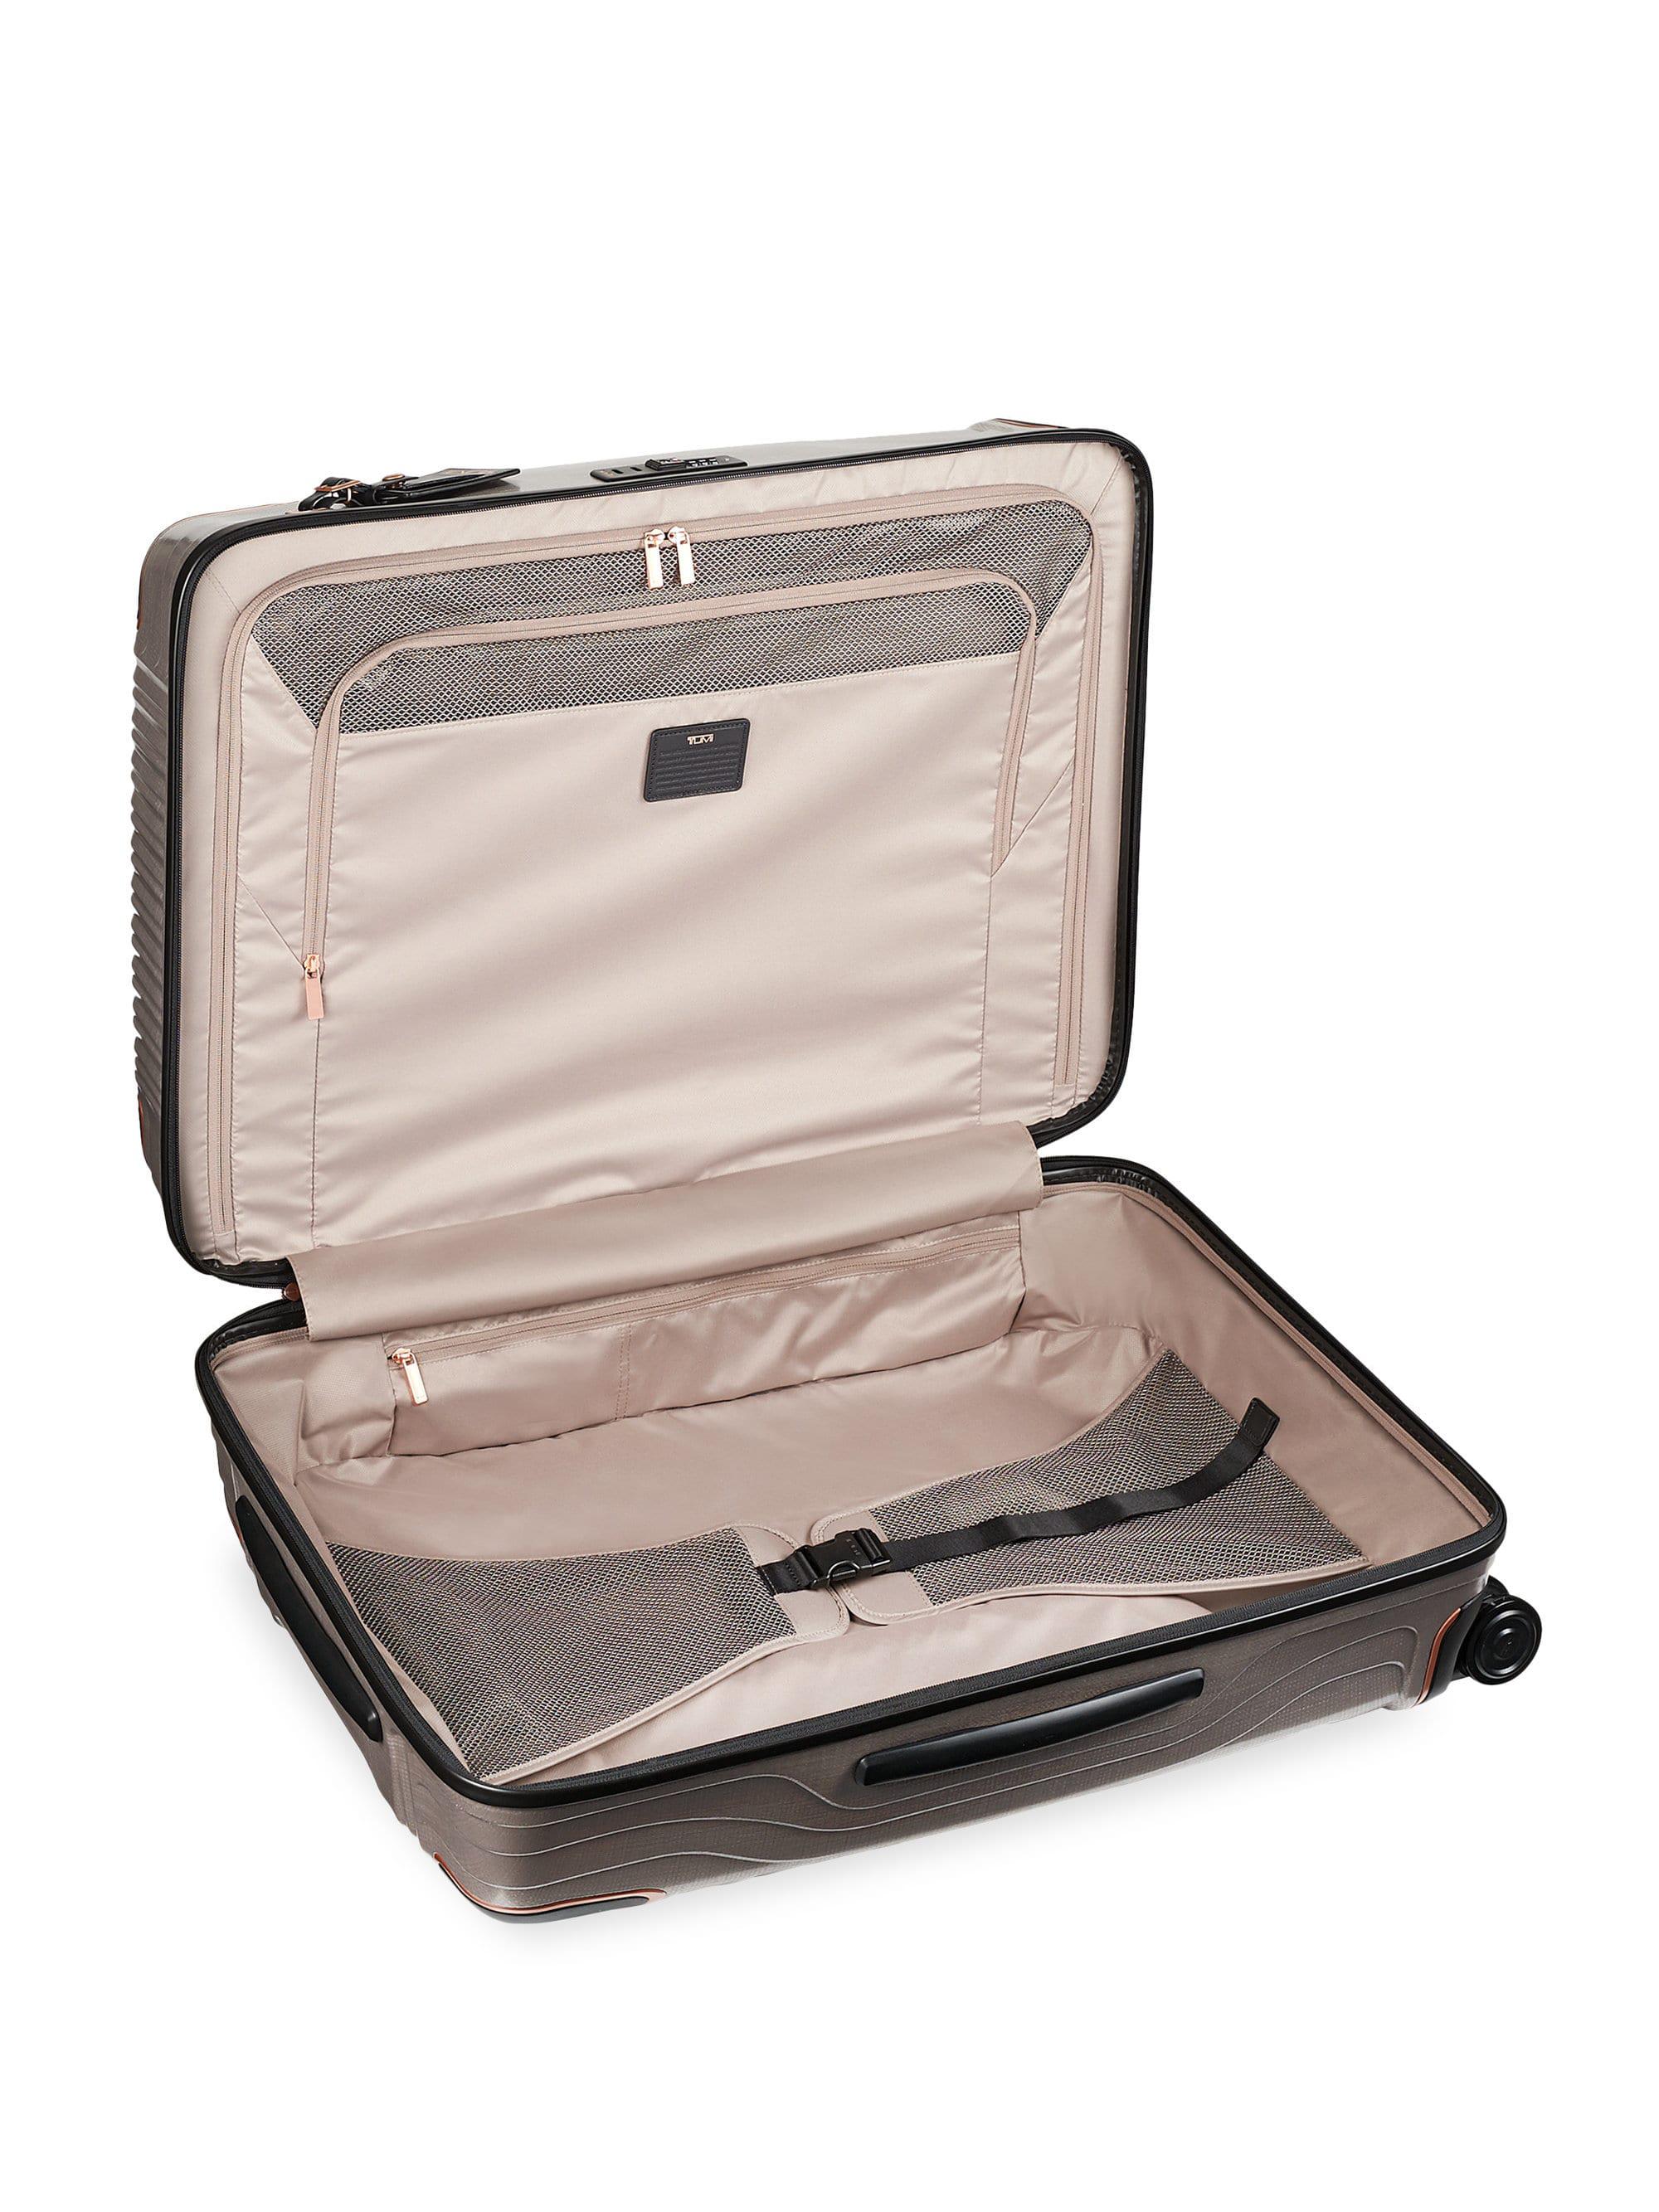 Lyst - Tumi Latitude Extended Trip Packing Suitcase for Men